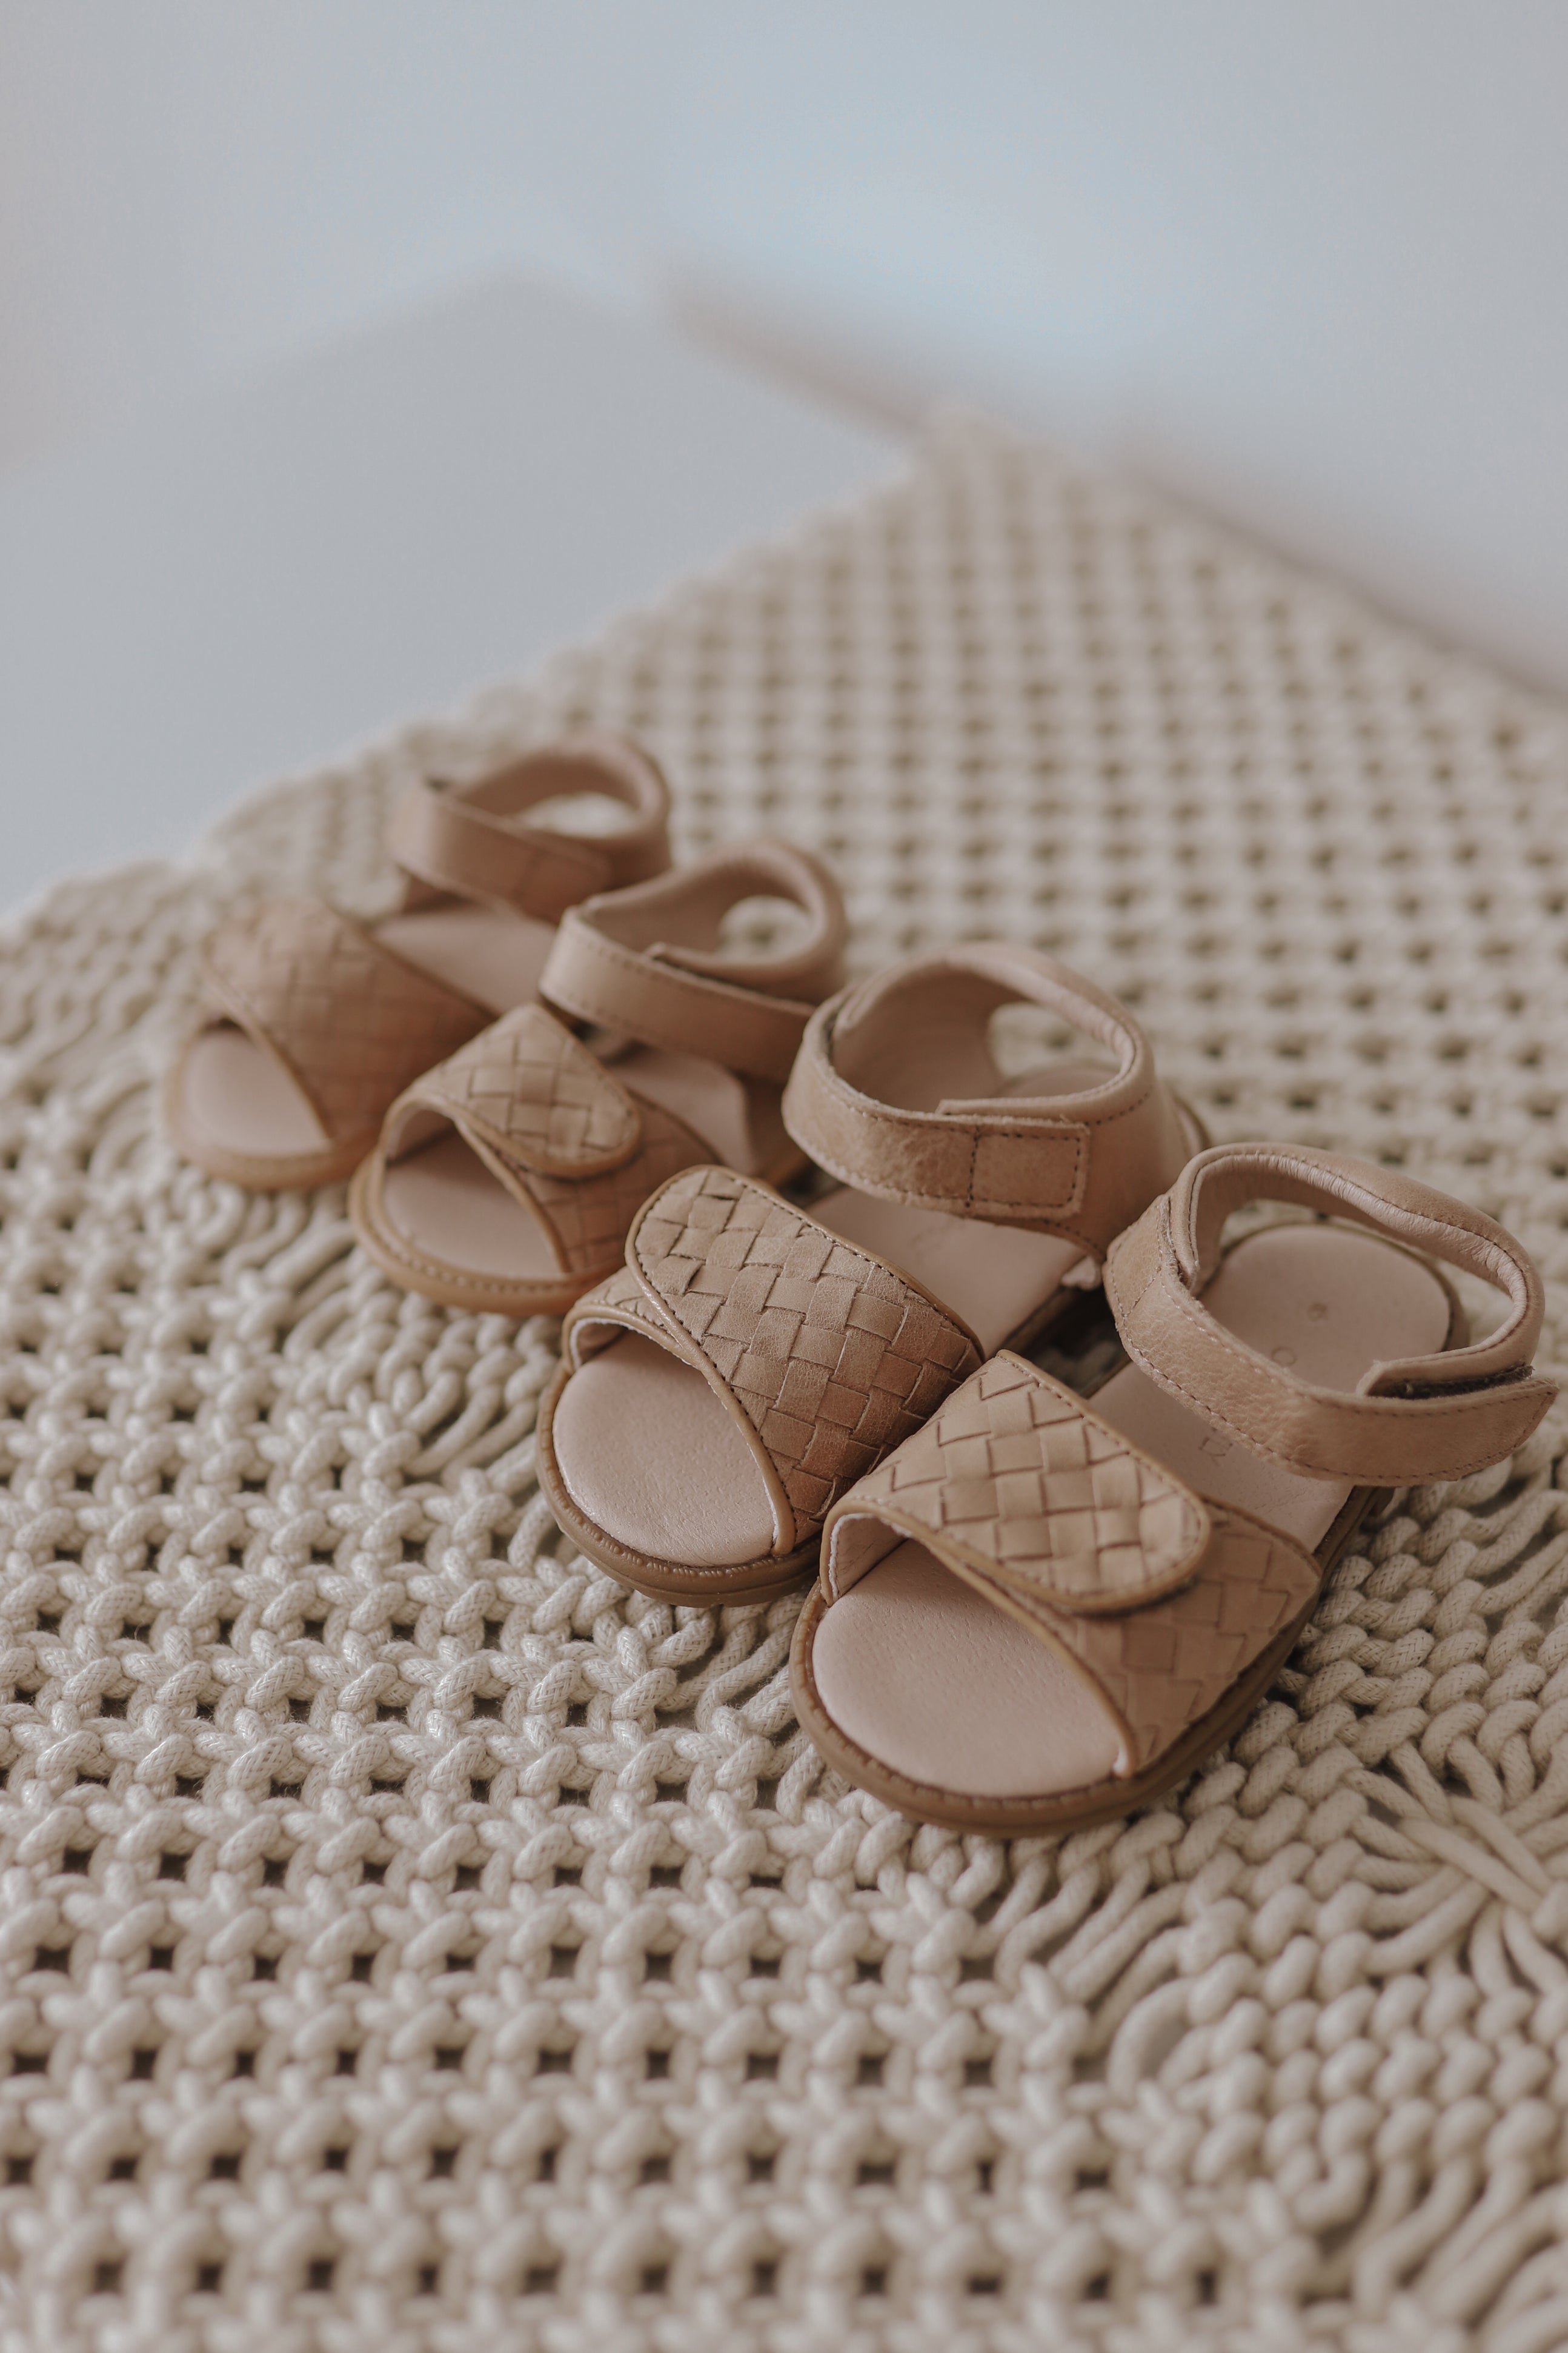 Leather Woven Sandal | Color 'Stone' | Soft Sole